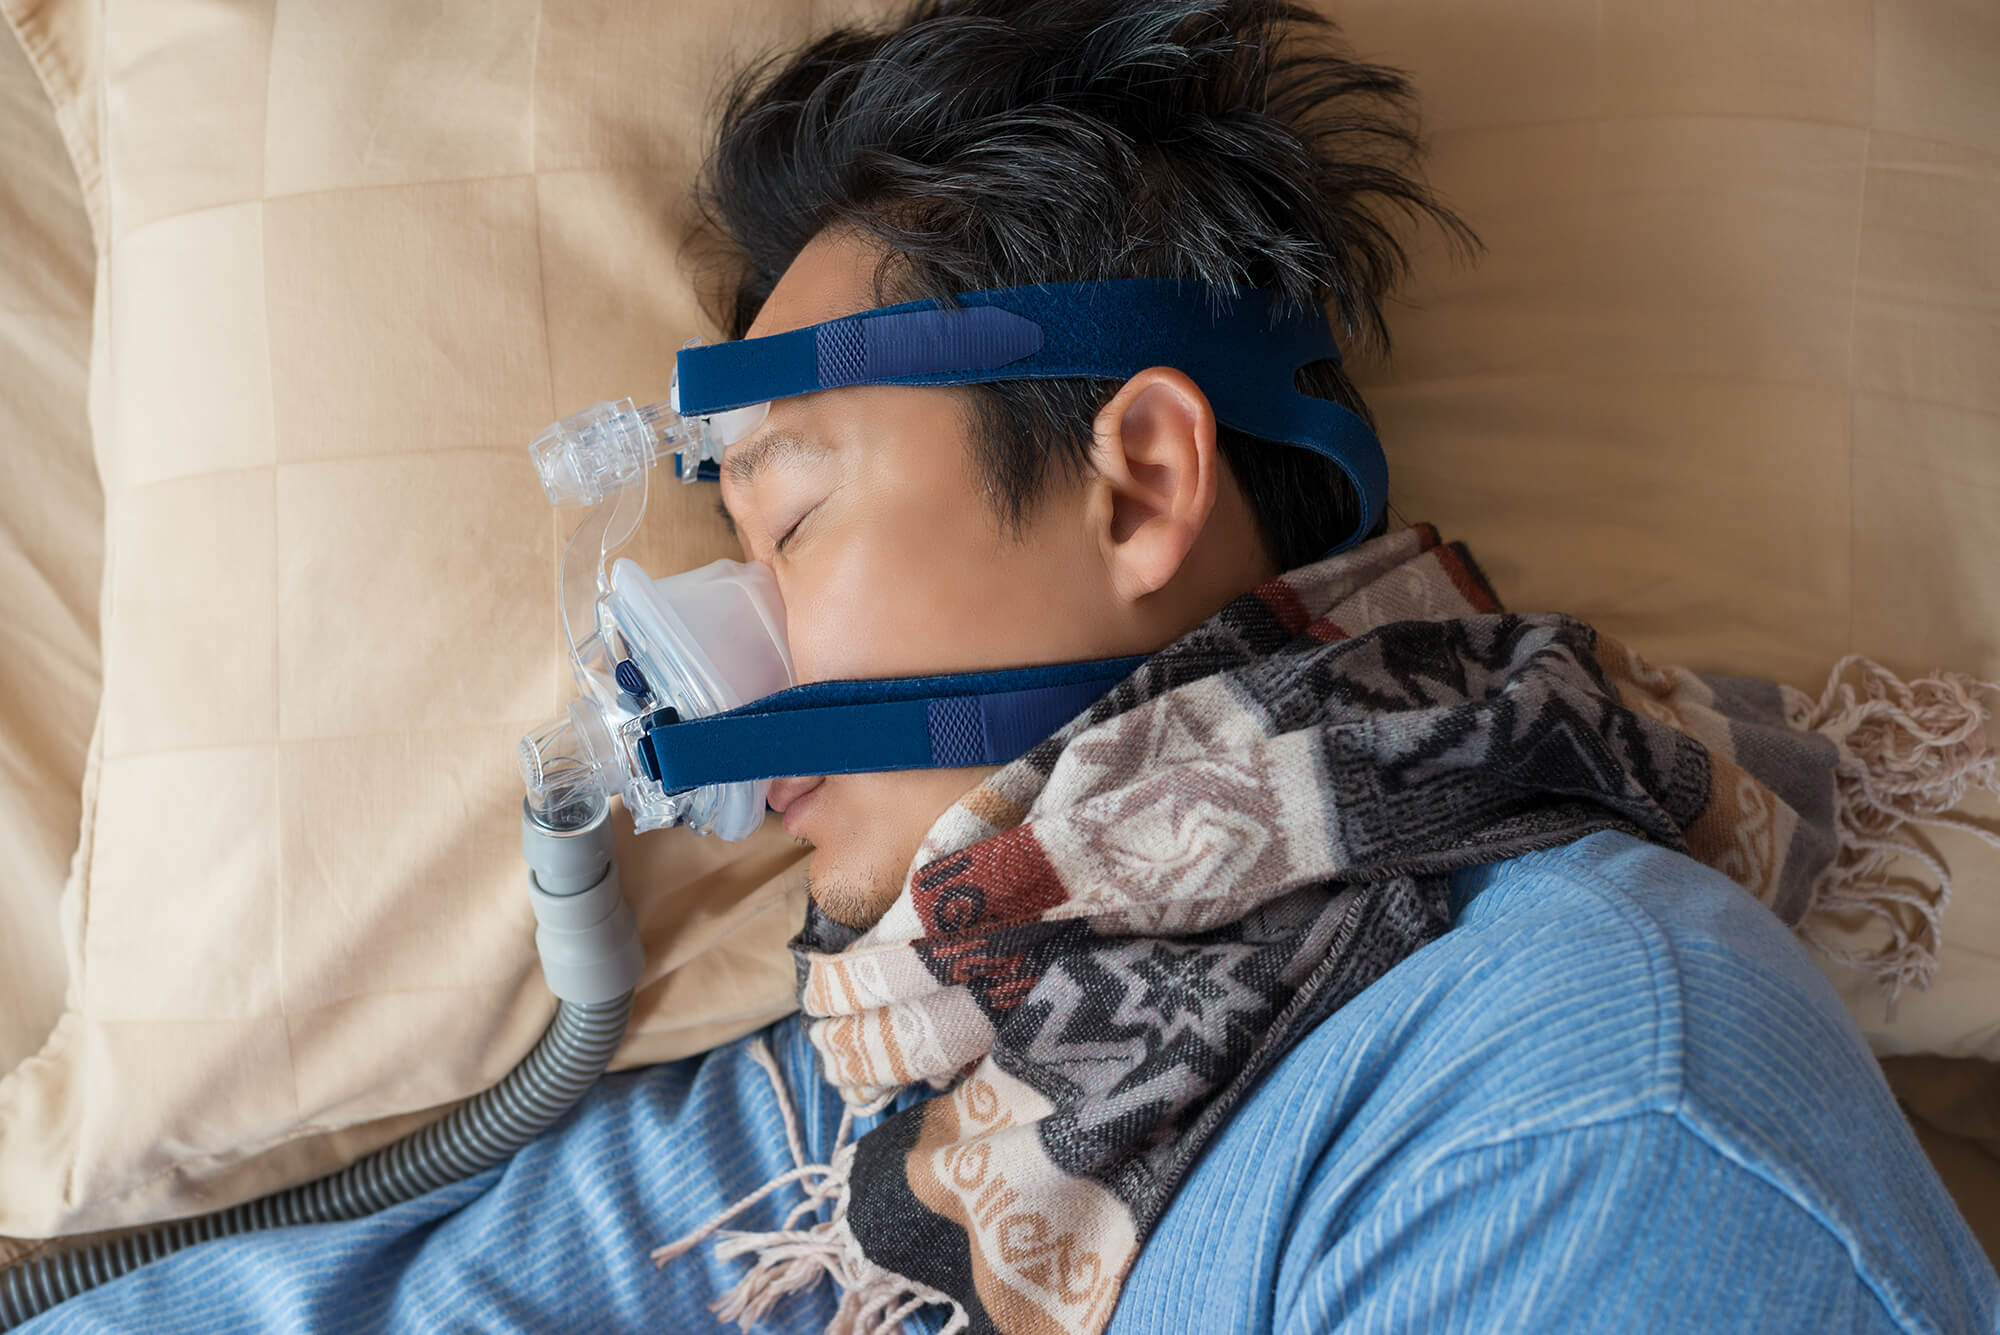 Read more about the article The Top 10 CPAP Compliance Strategies for Effective Sleep Apnea Therapy